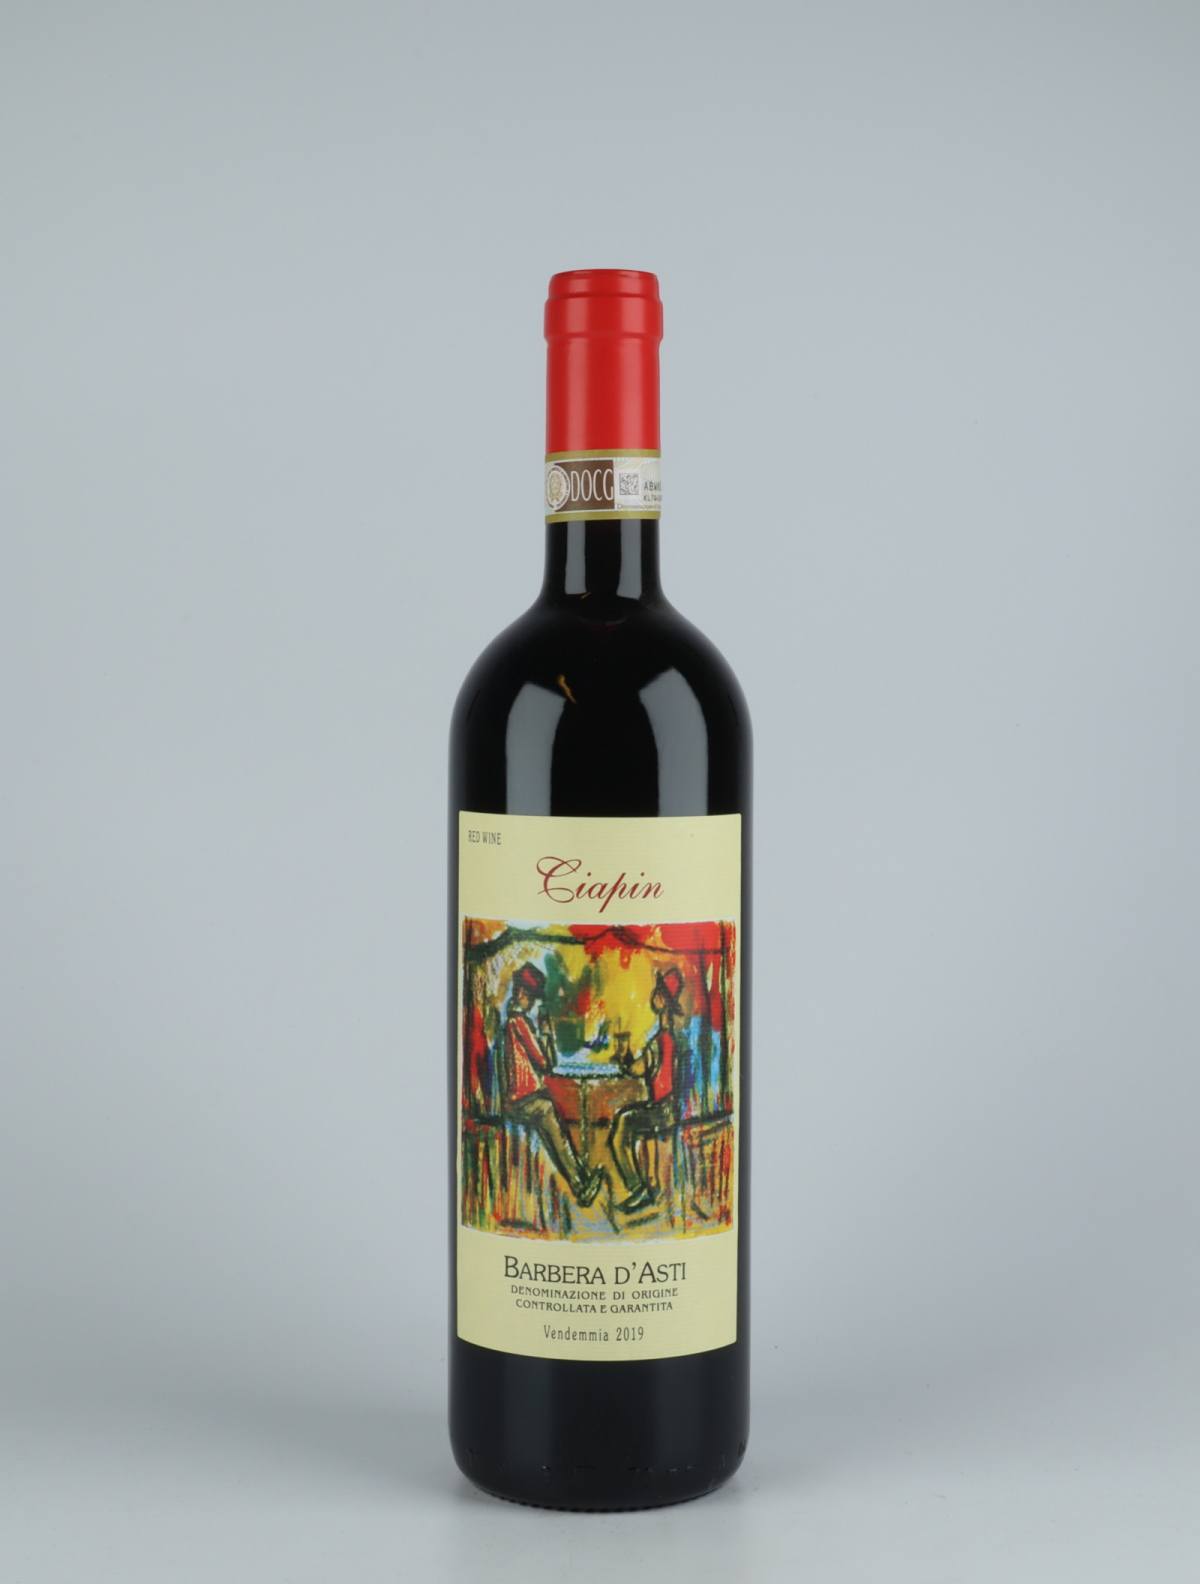 A bottle 2019 Ciapin Red wine from Andrea Scovero, Piedmont in Italy